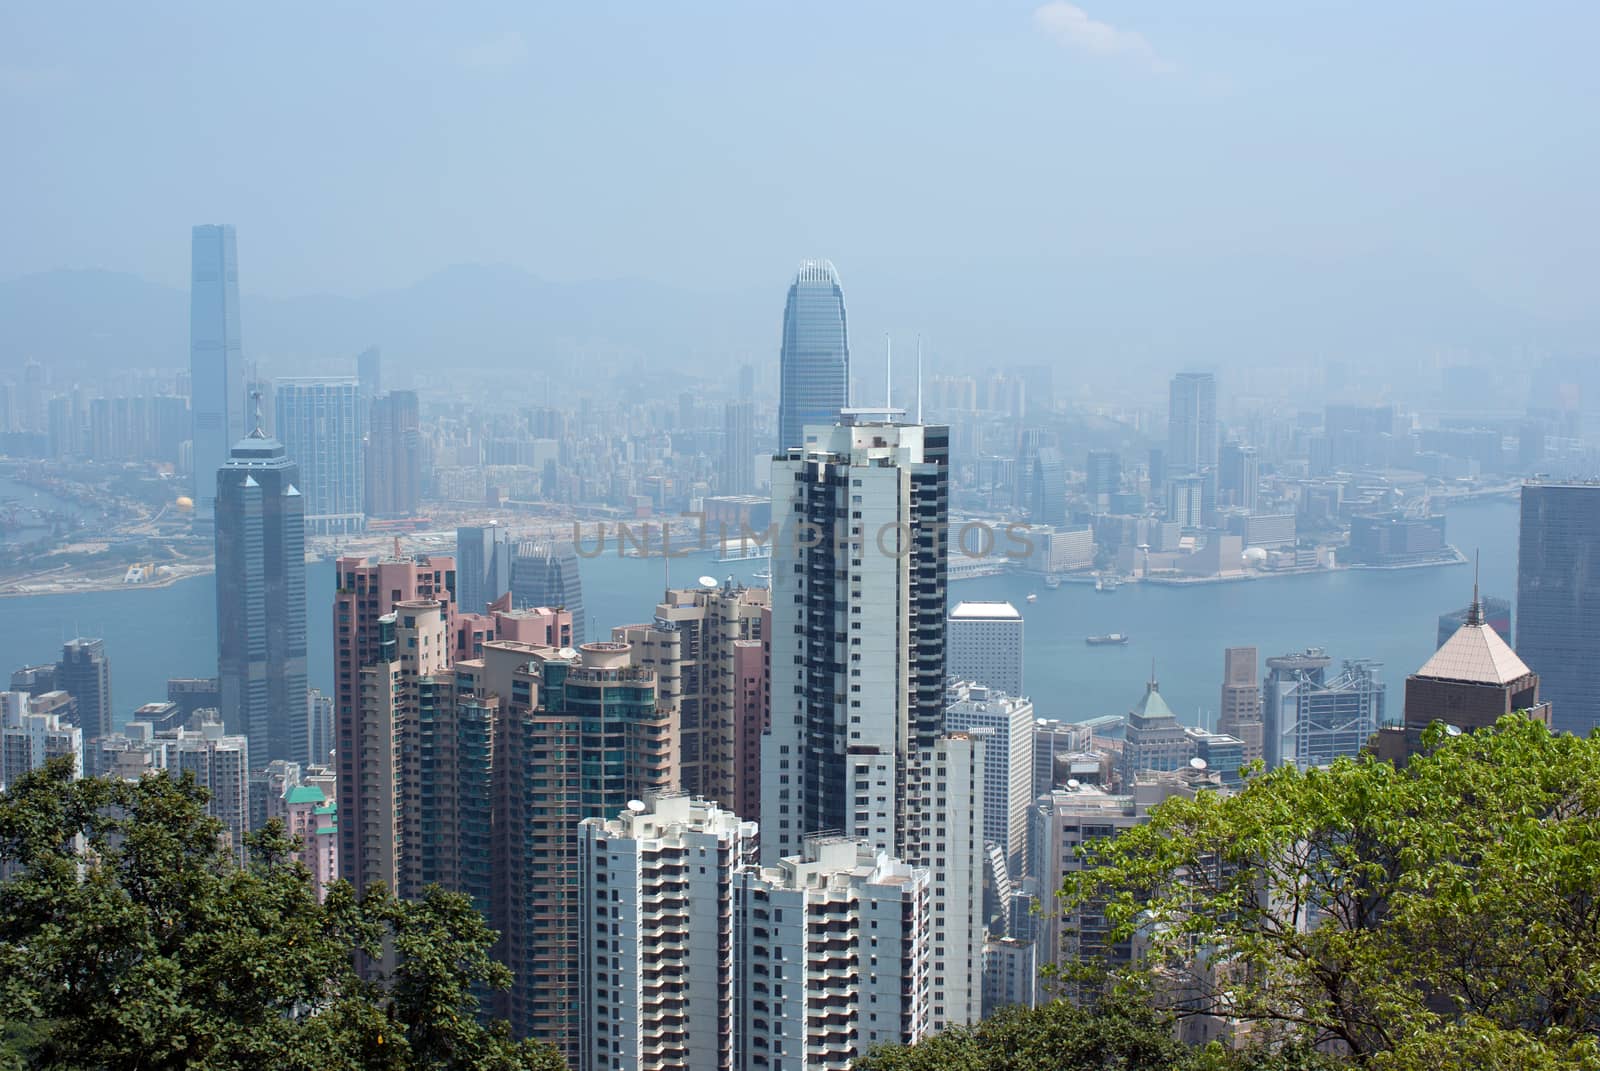 Hong Kong skyline viewed from top by daoleduc